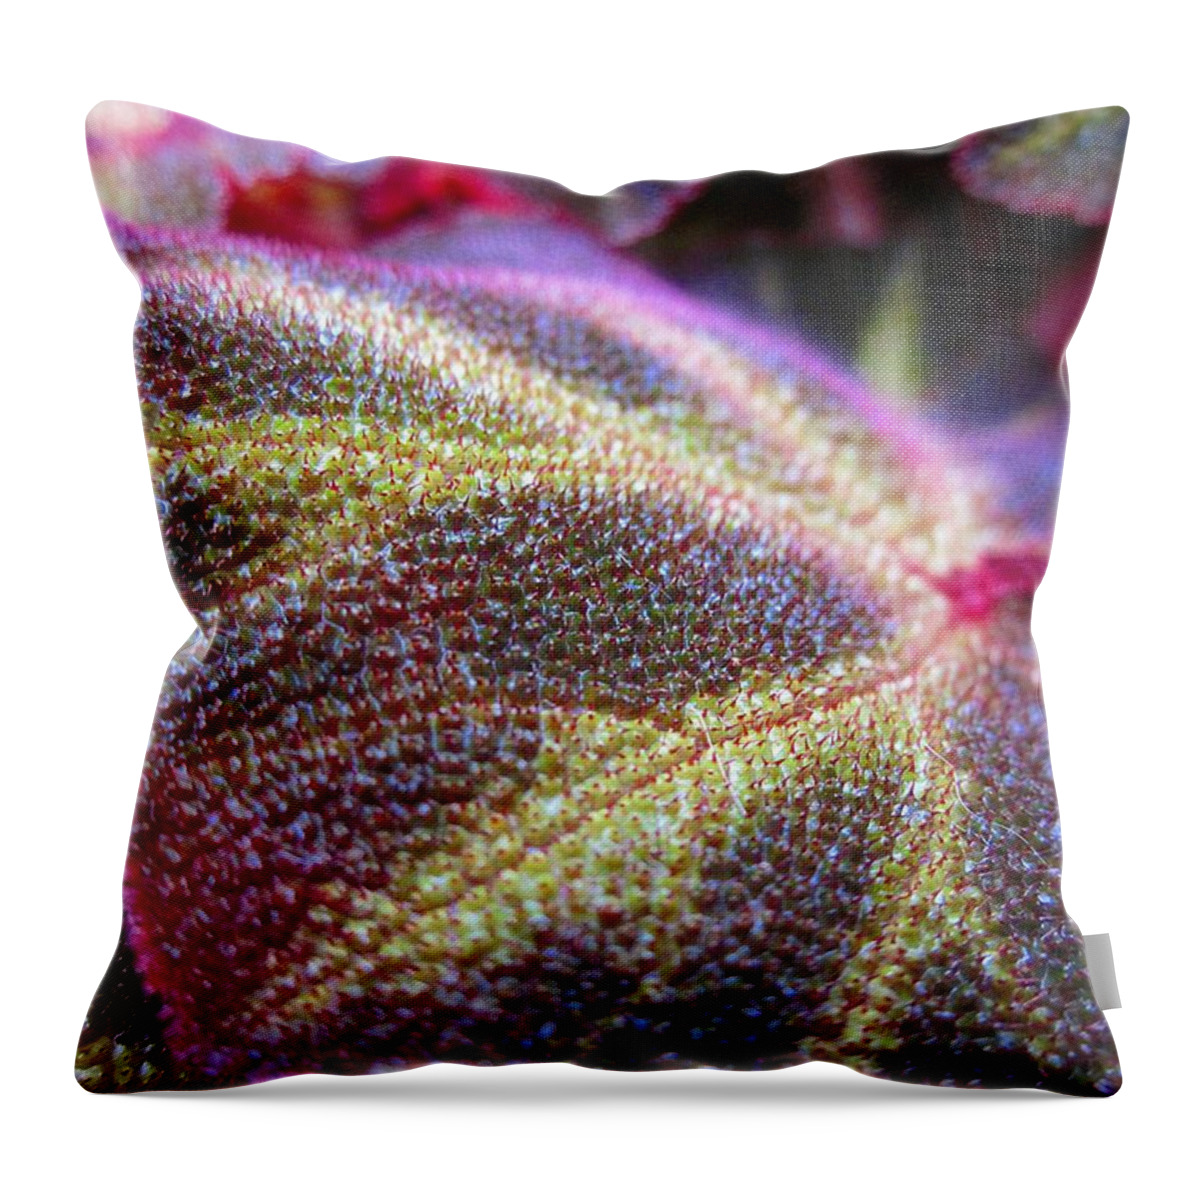 Leaf Throw Pillow featuring the photograph Fancy Leaf by MTBobbins Photography